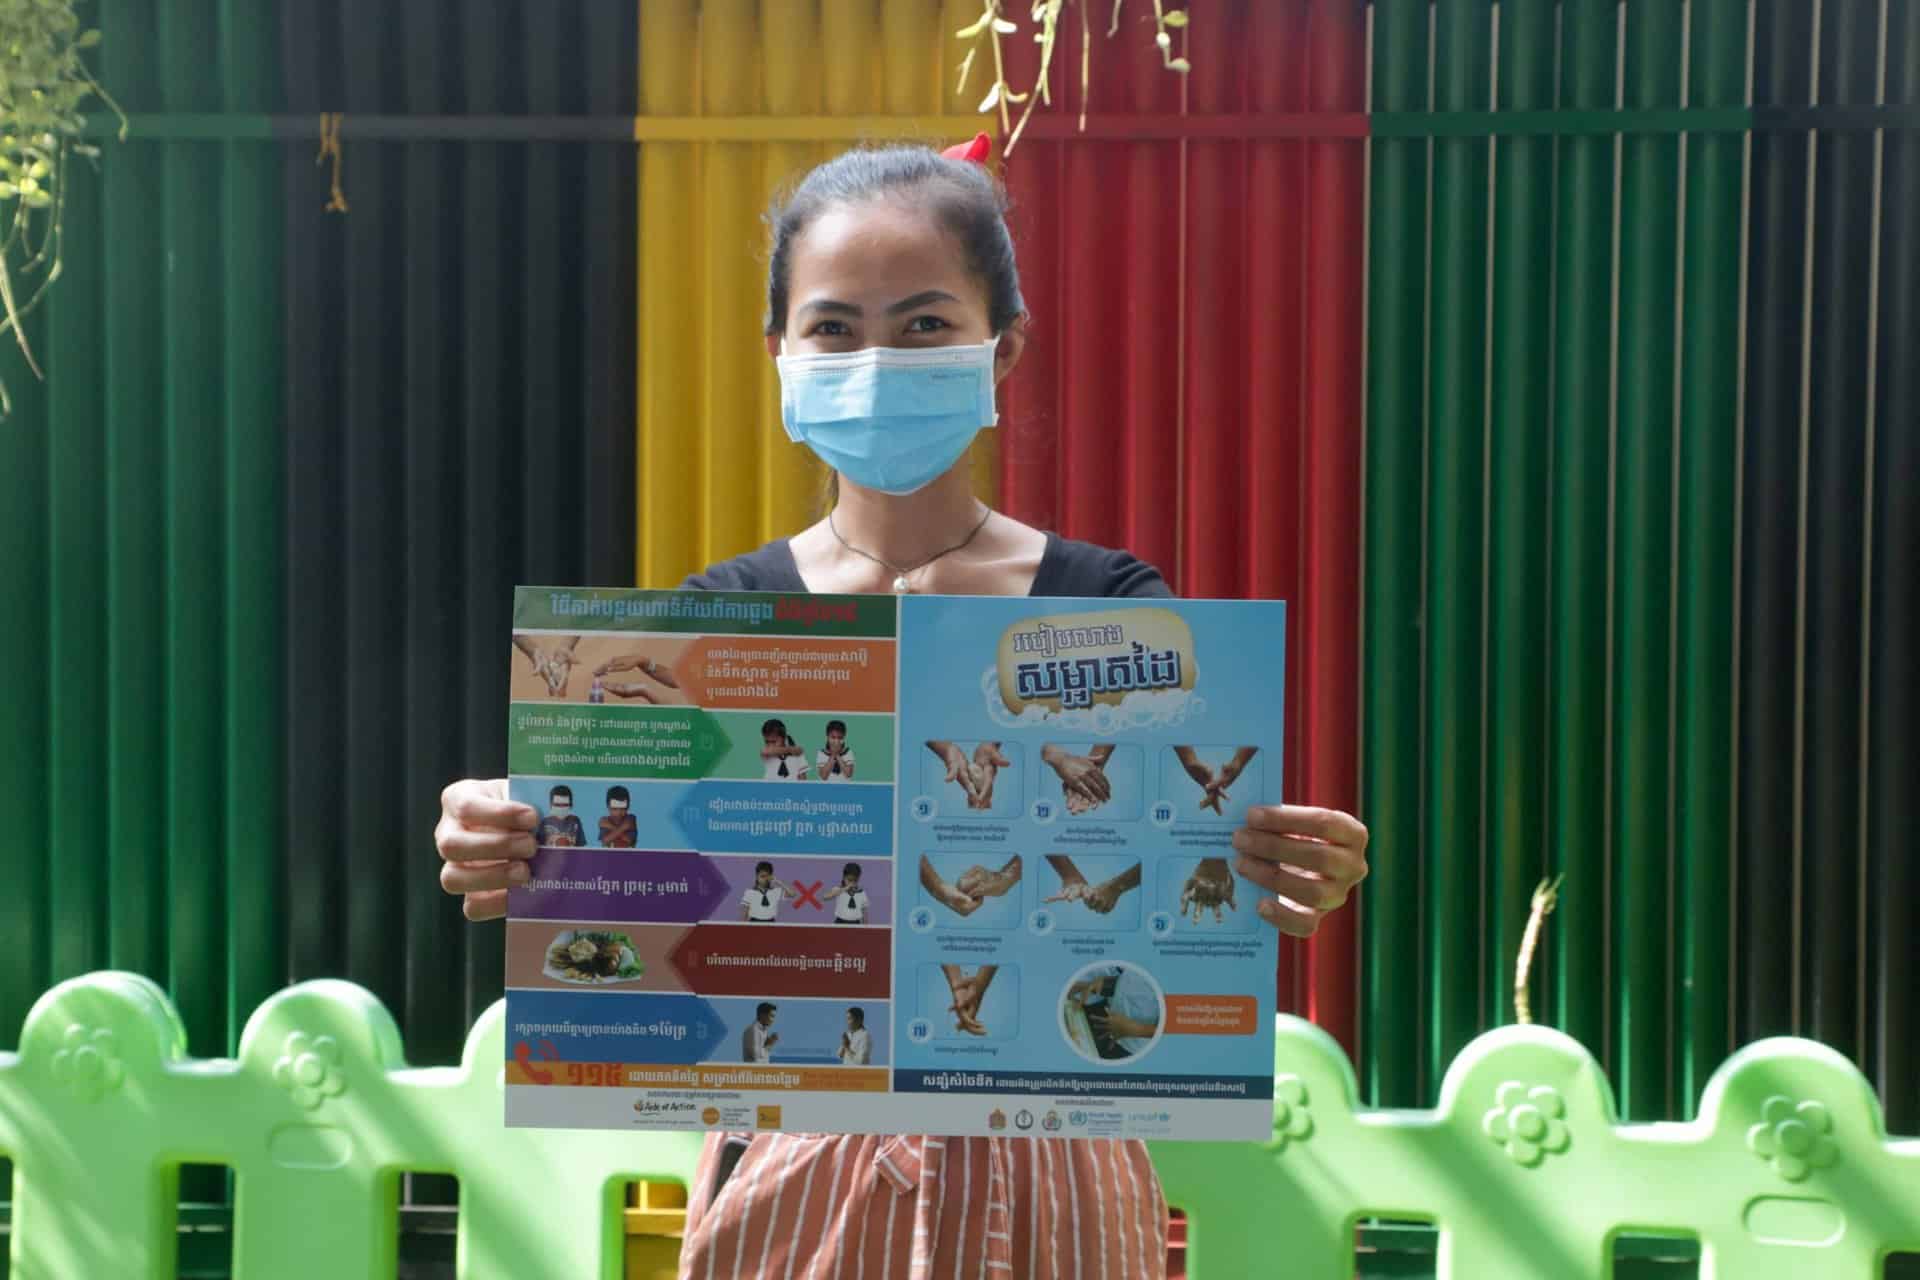 Aide et Action uses education to address the COVID-19 crisis in Southeast Asia